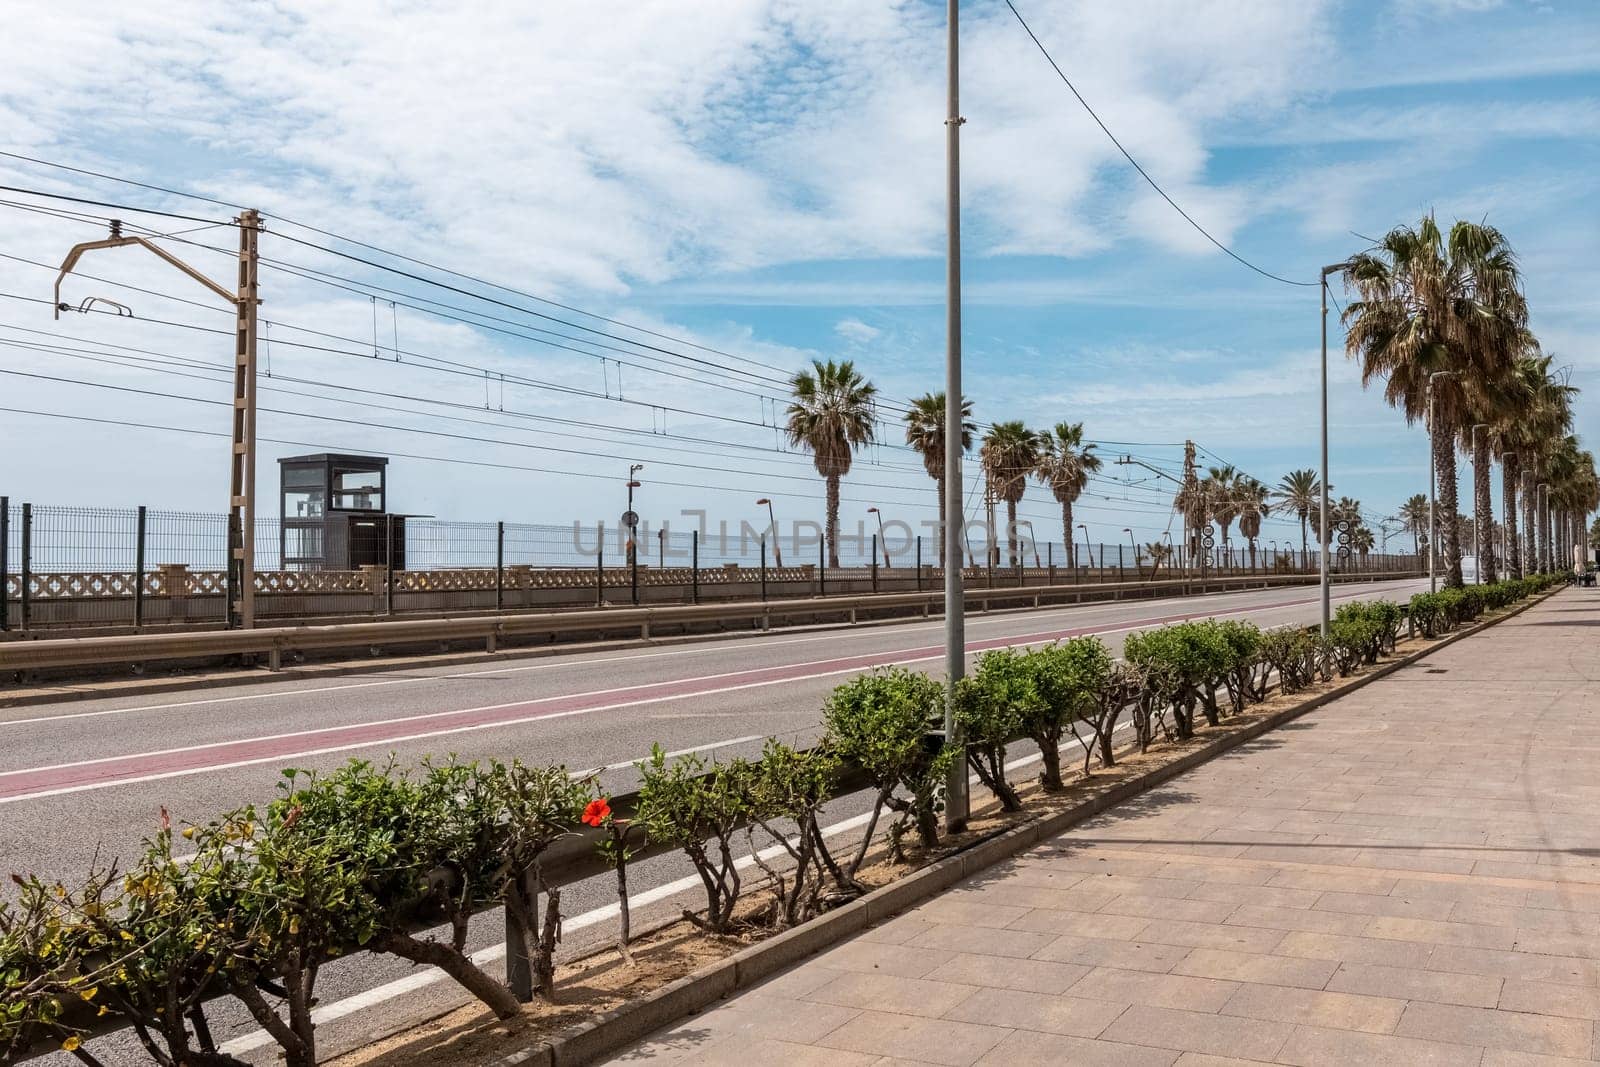 Road with palms and power lines in Vilassar de Mar by apavlin